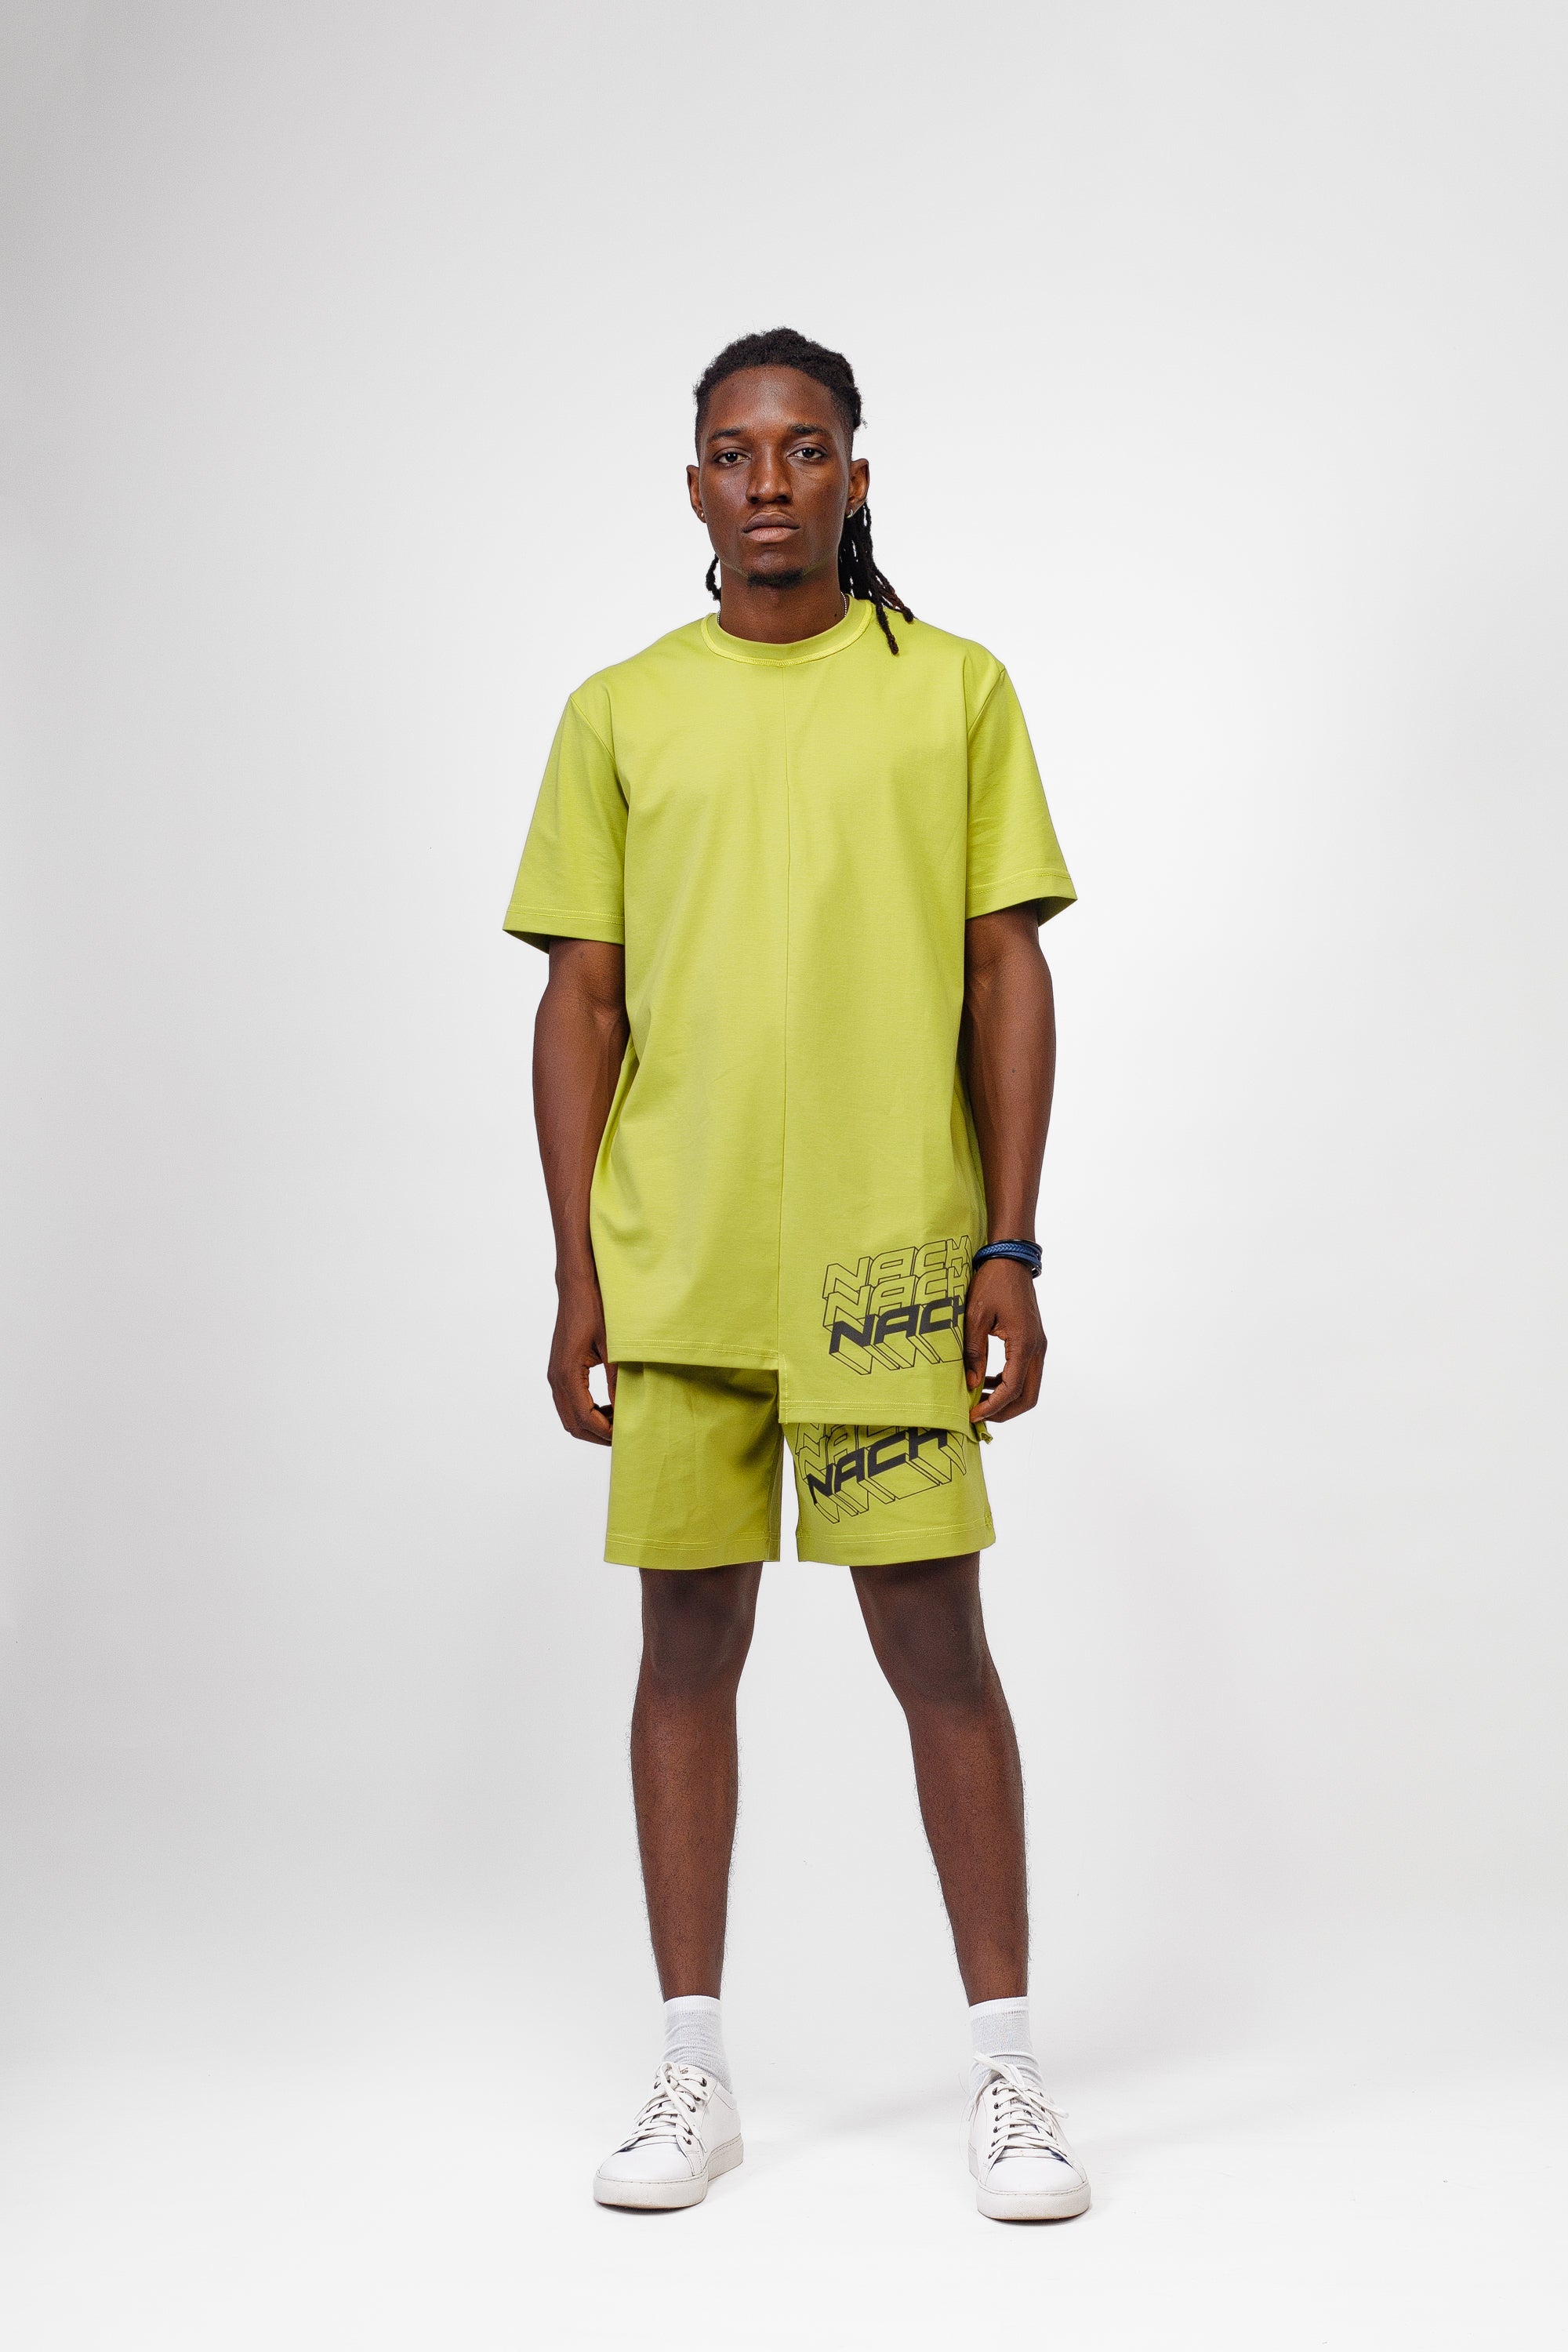 NACK Homegrown Coord in Lemon Green